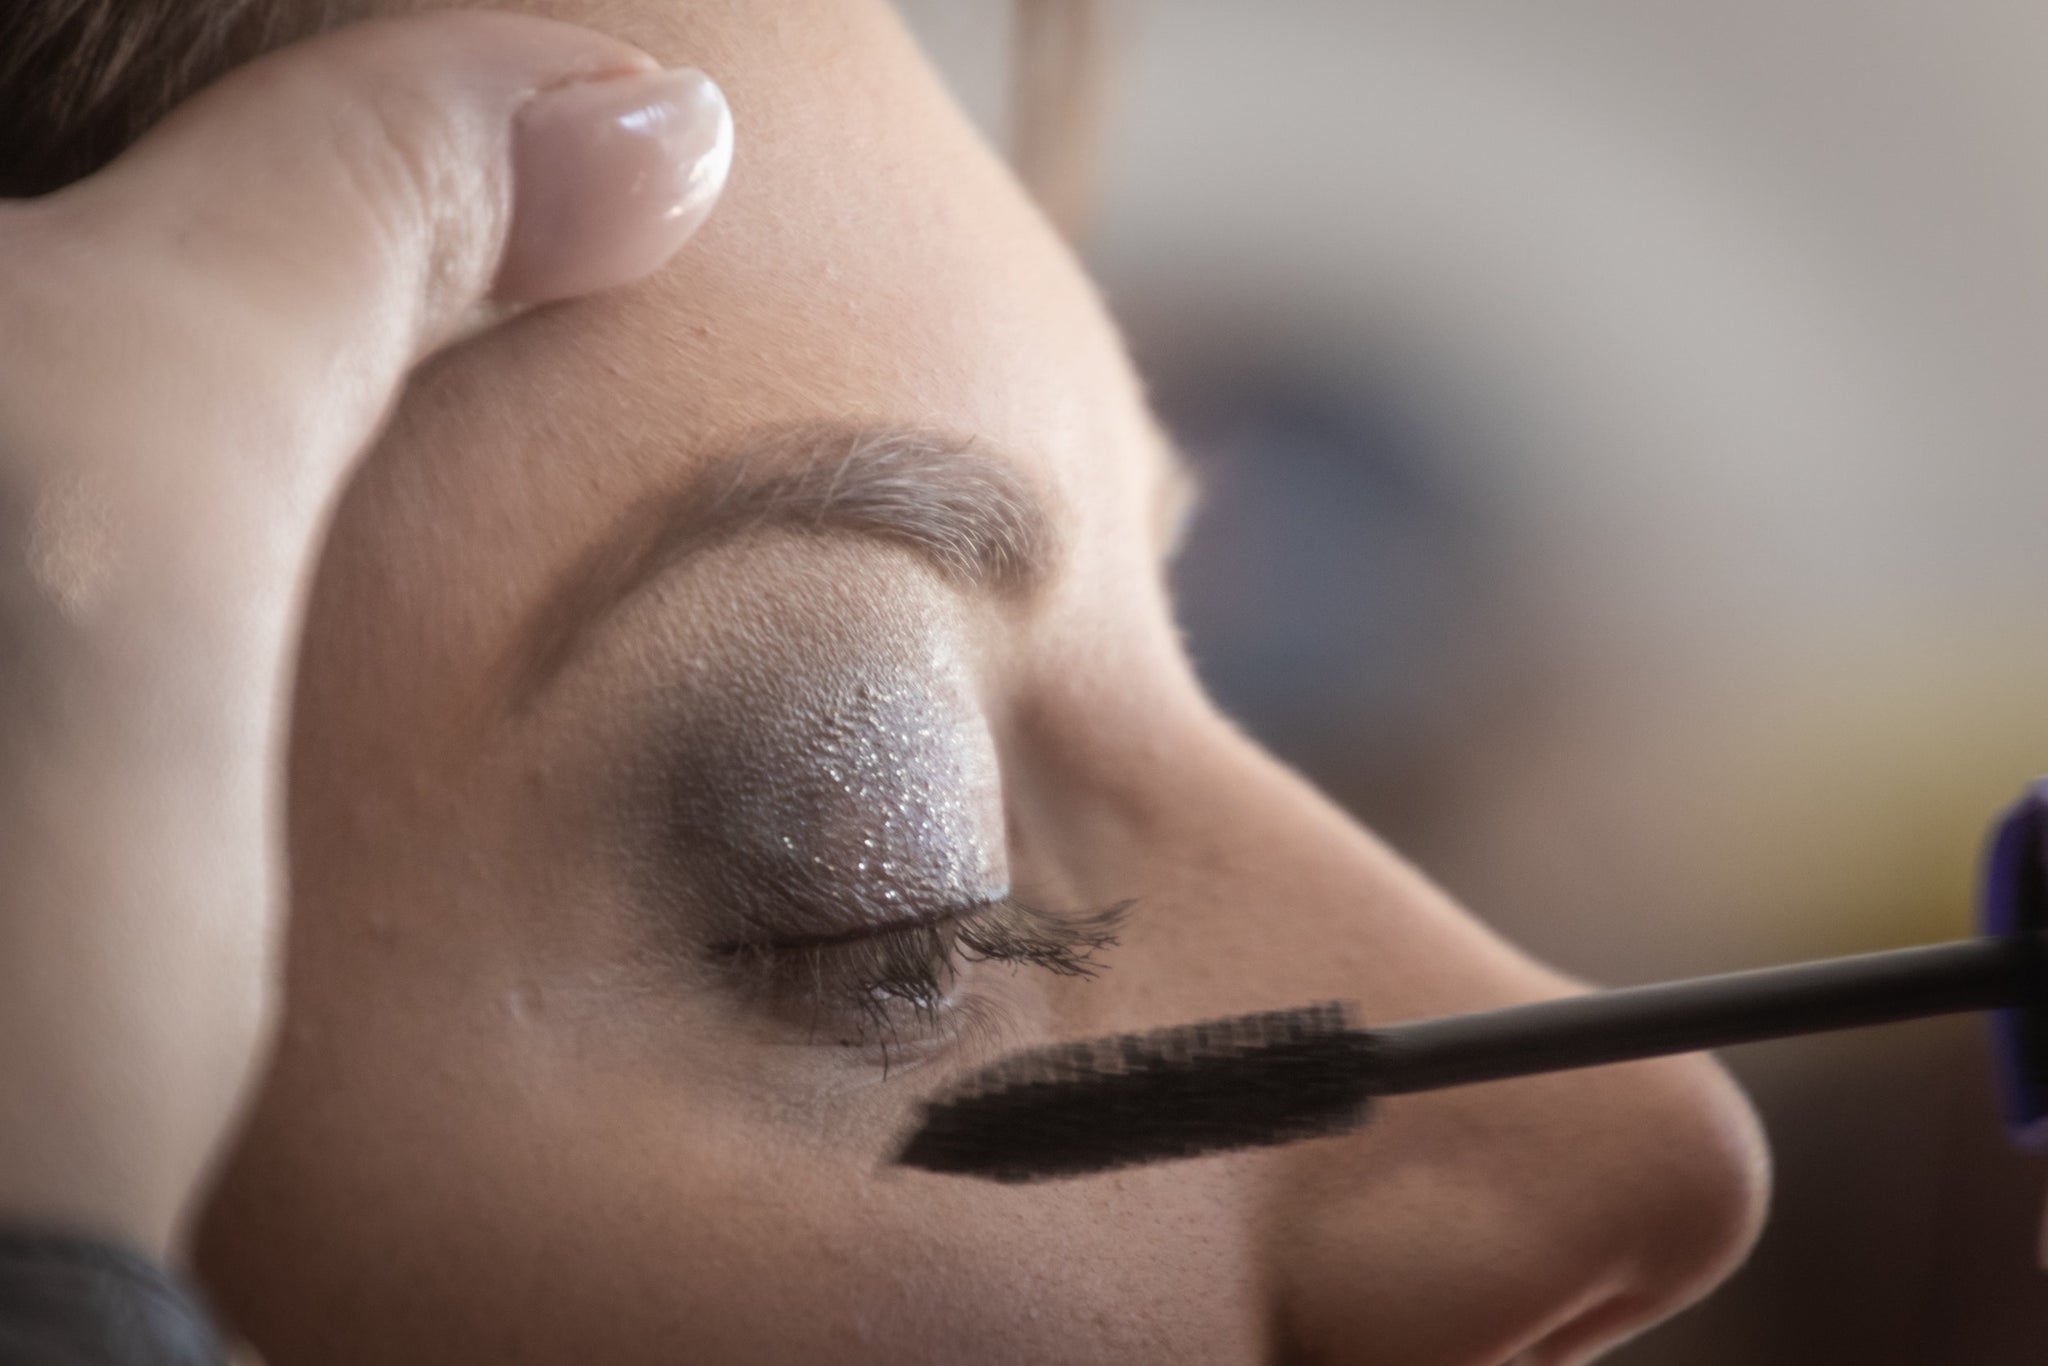 Eye make-up tips for the over 40's